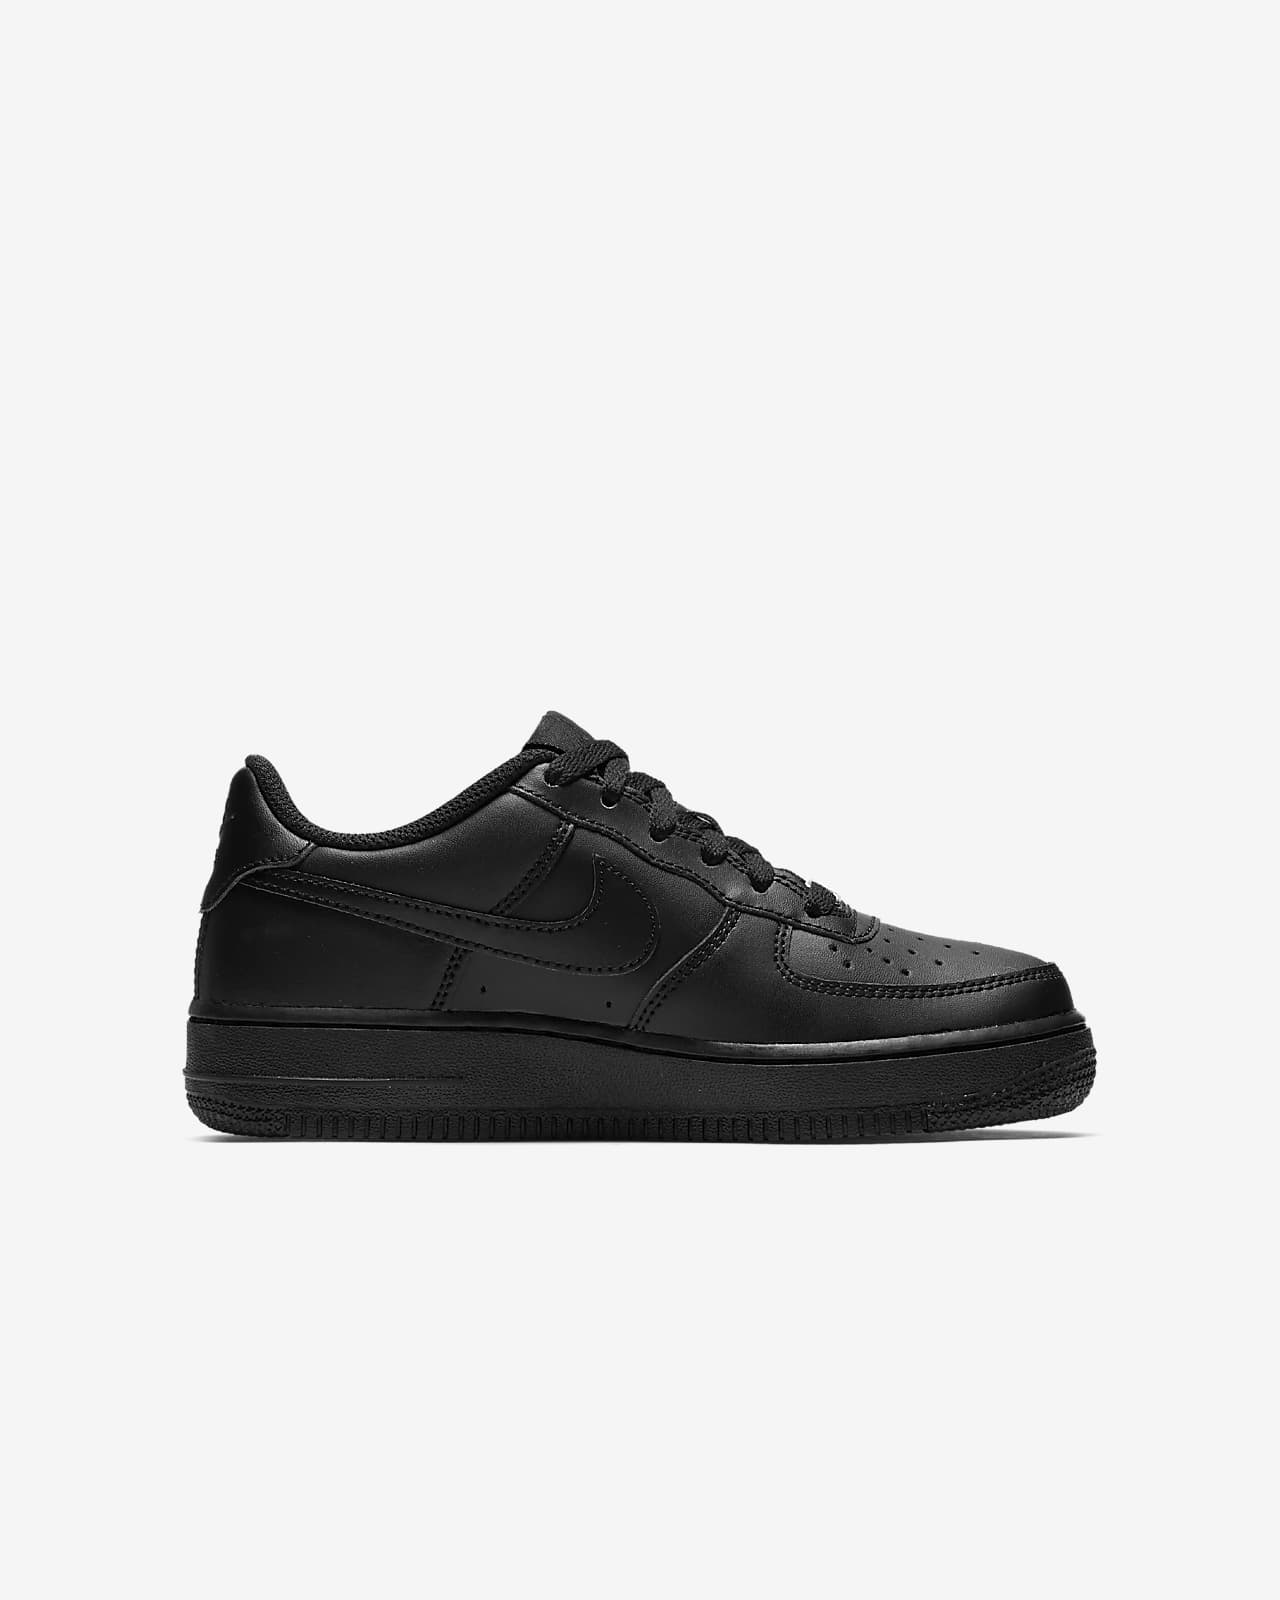 nike air force 1 child